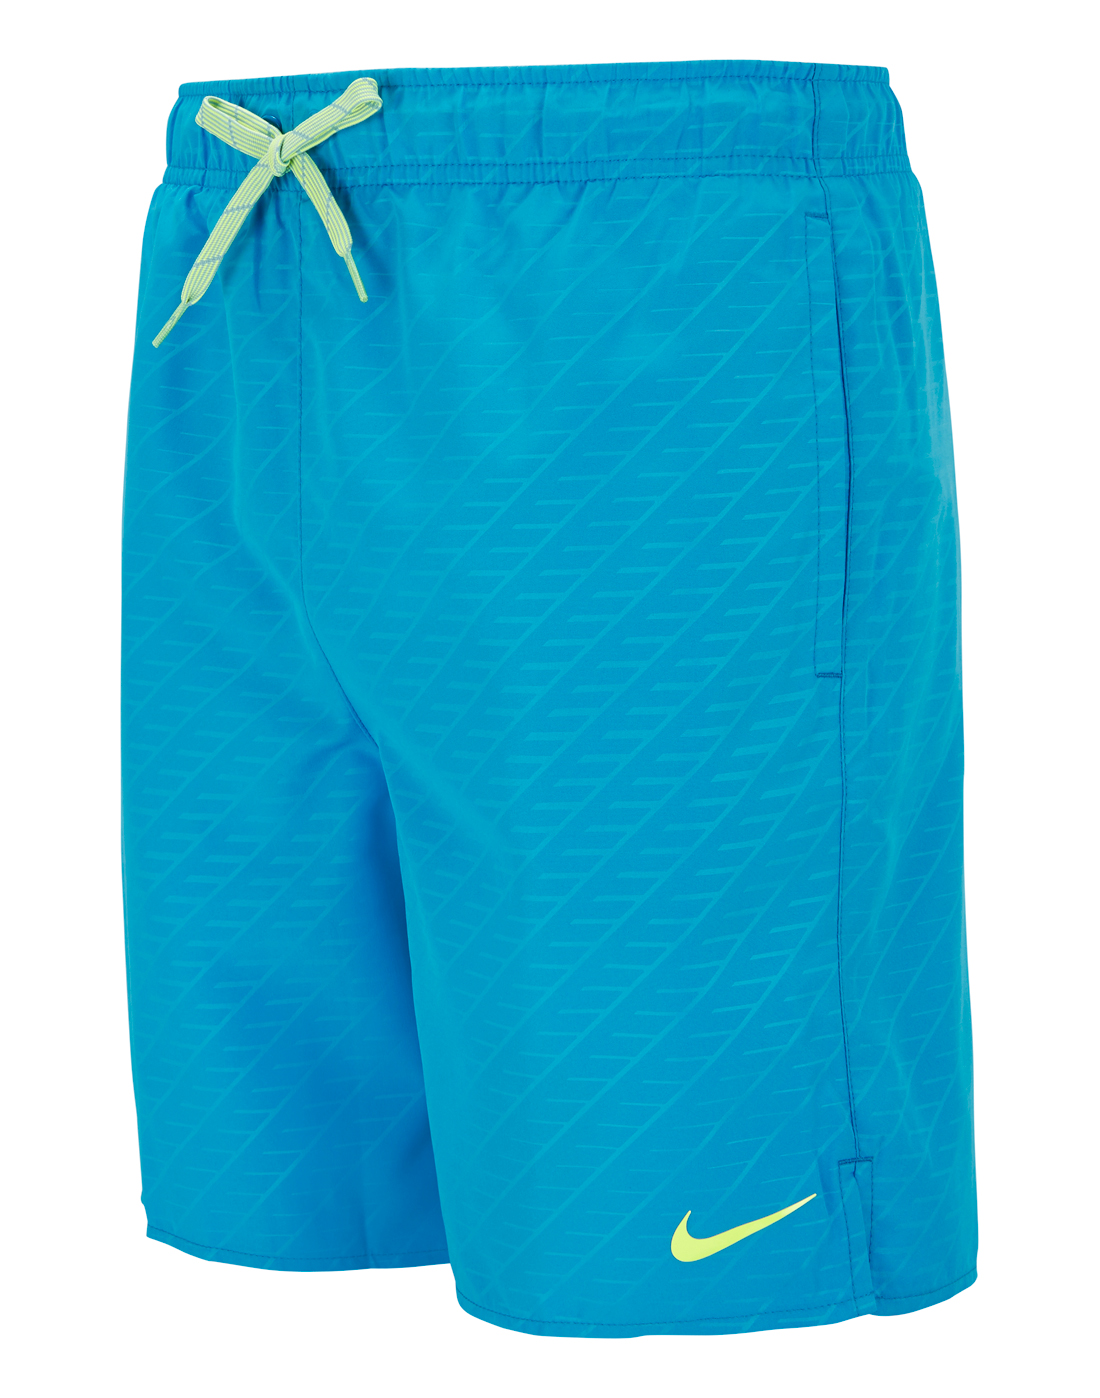 Nike Mens 7 Inch Volley Short - Blue | Life Style Sports EU